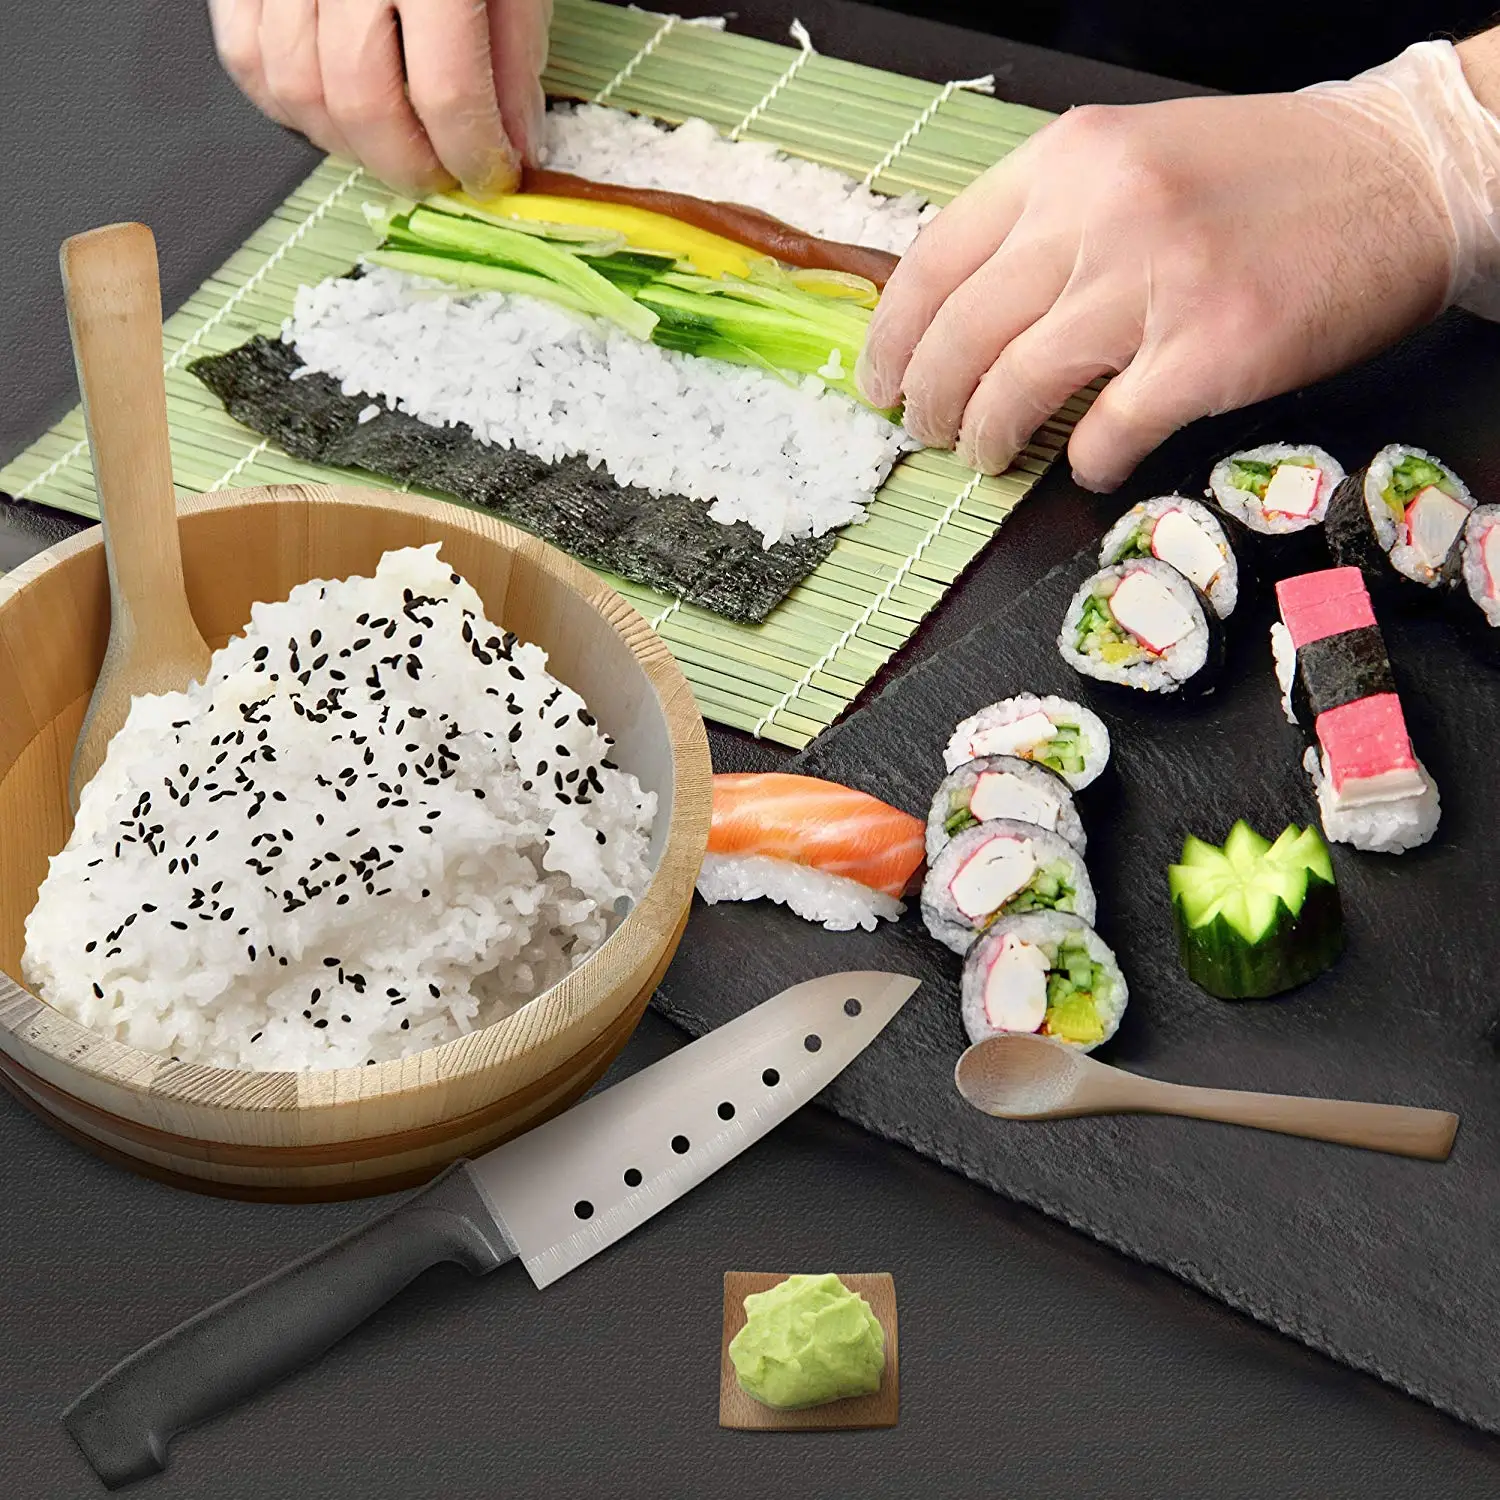 Most popular high quality sushi making kit tools for beginners